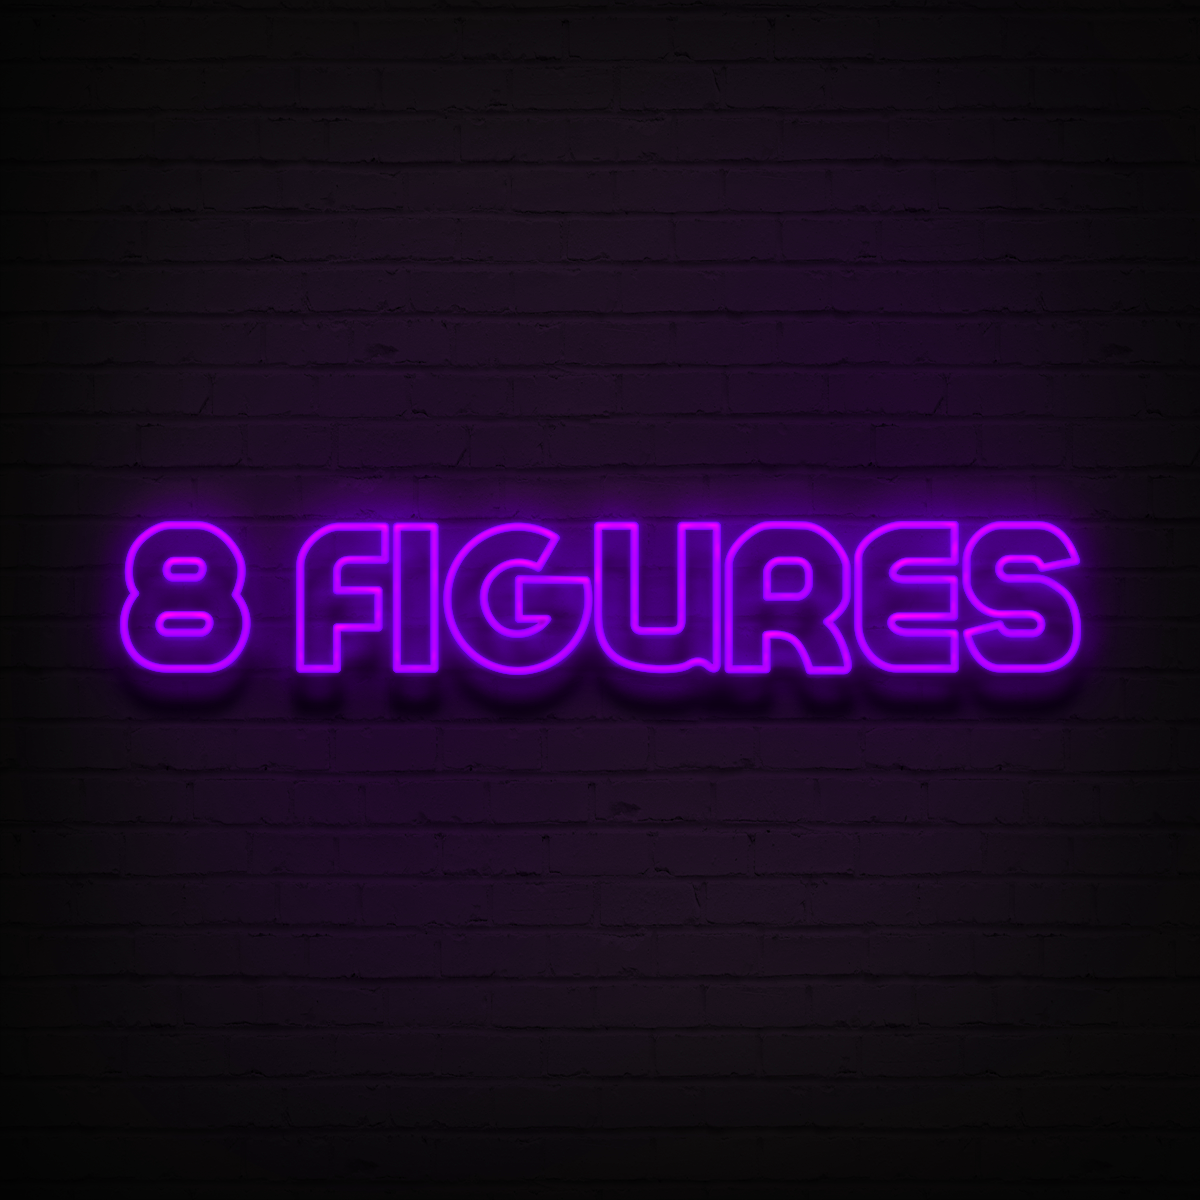 '8 Figures' LED Neon Sign